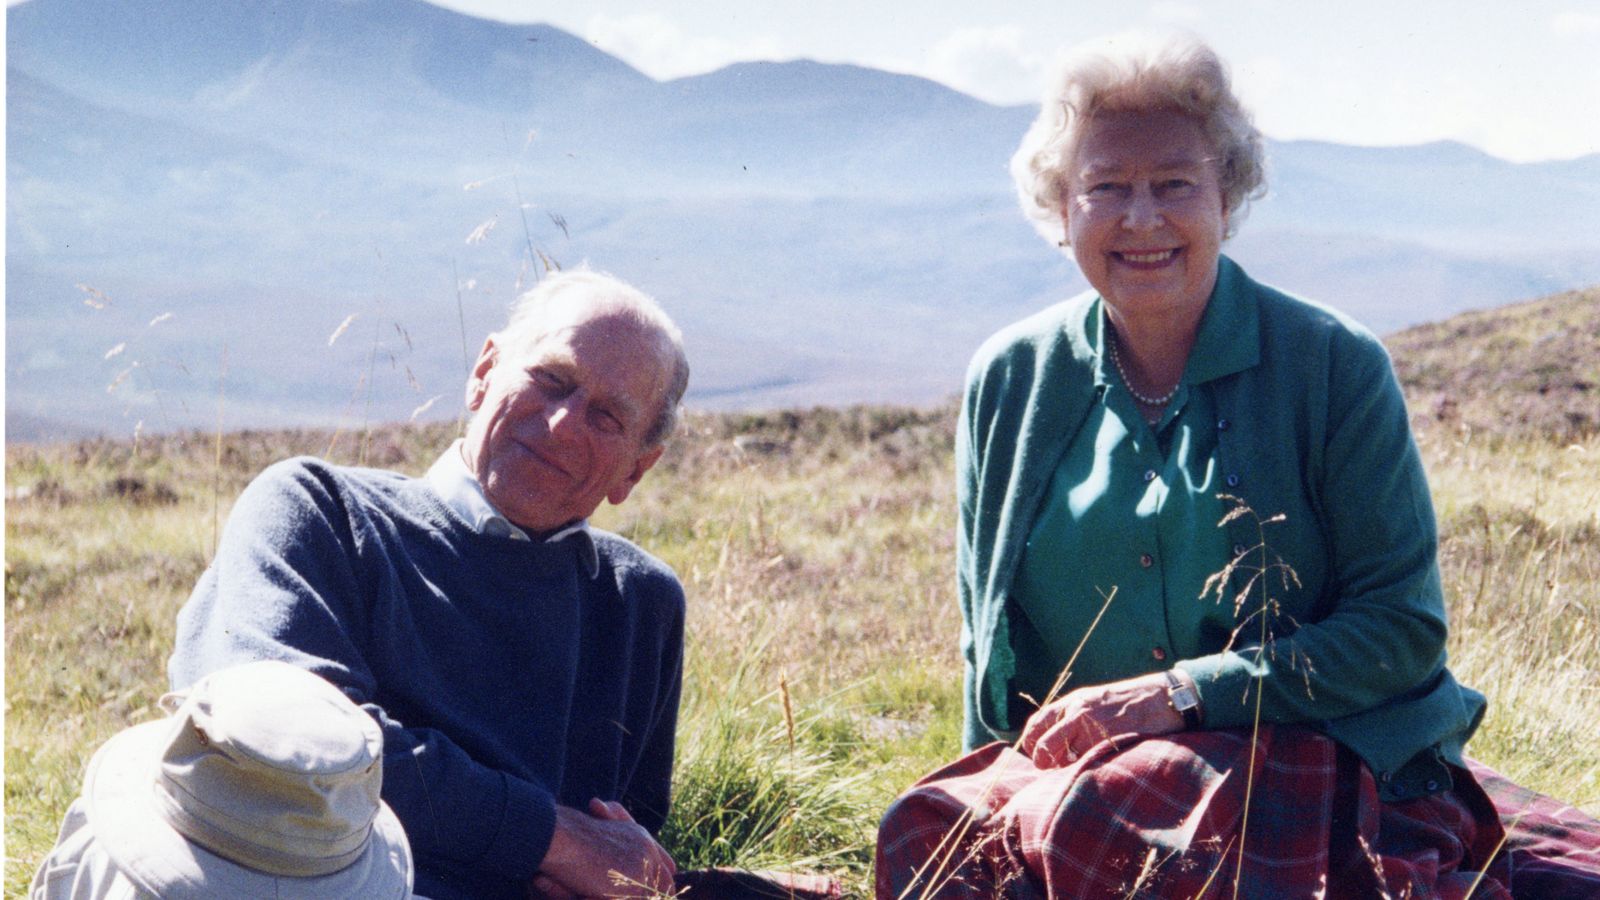 Prince Philip: The Queen shares a private photo of her and the Duke of Edinburgh on holiday in Scotland  UK News